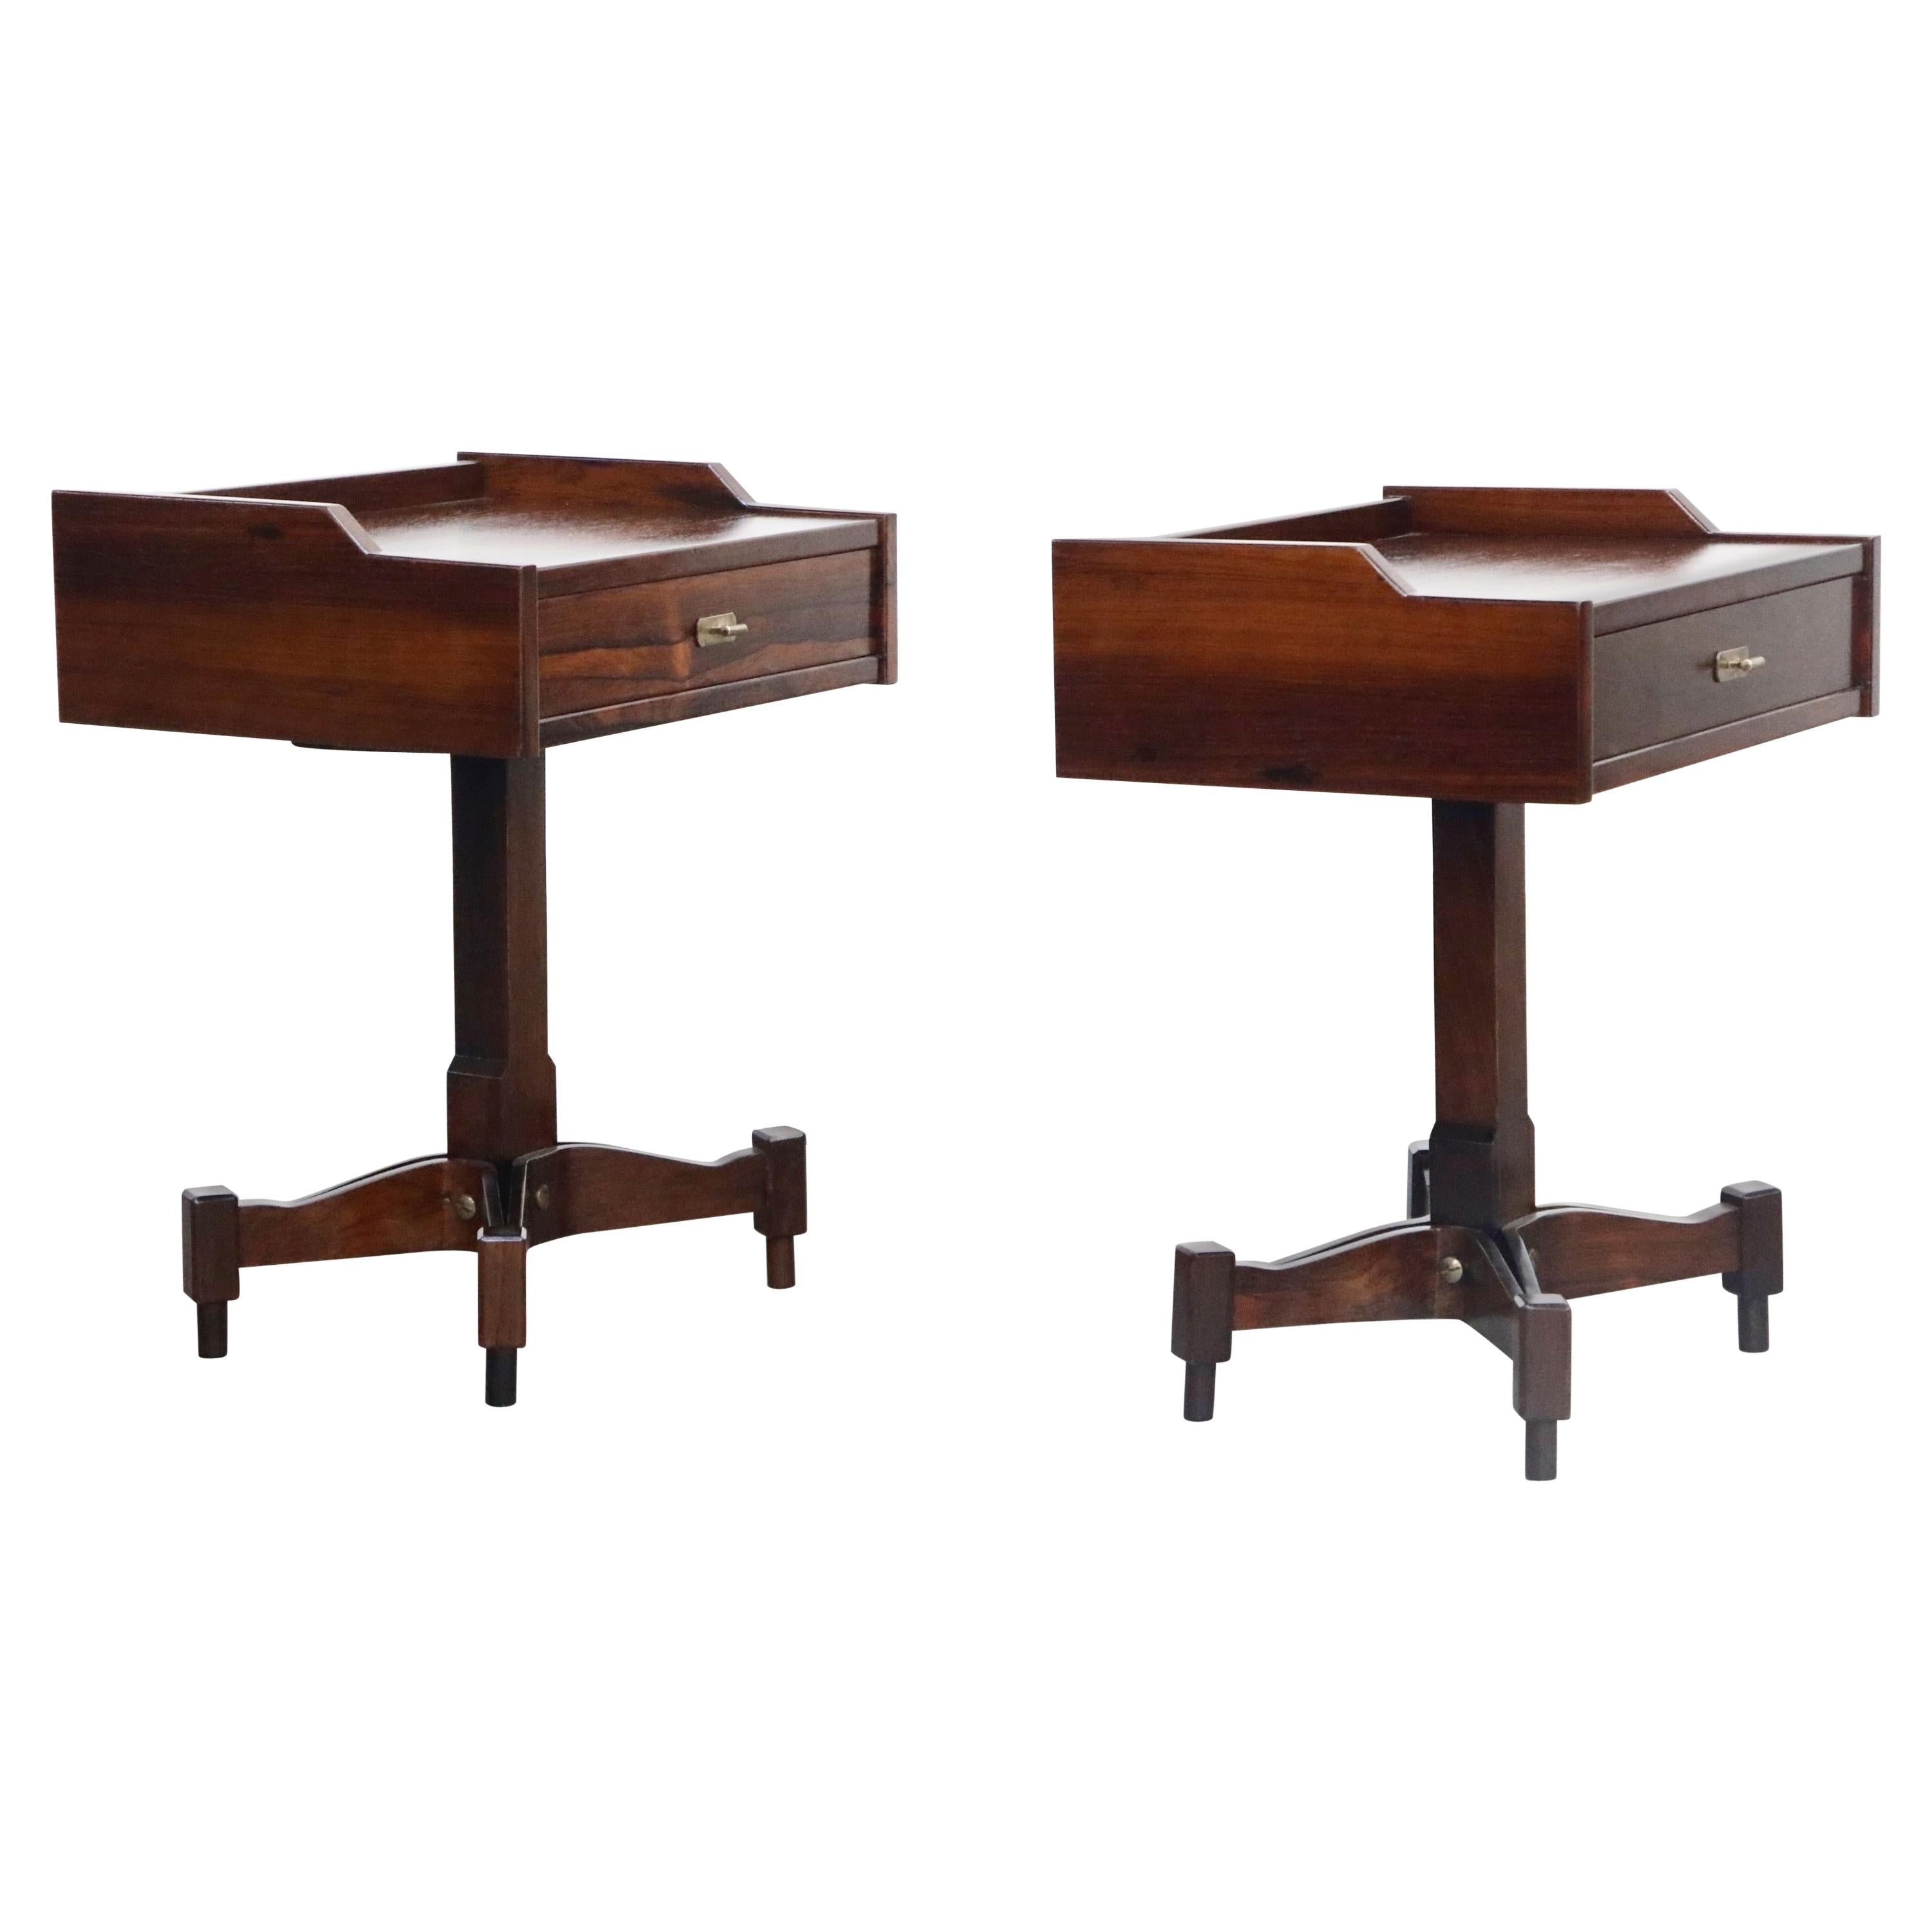 Rosewood Nightstands by Claudio Salocchi for Sormani, Italy, c 1960s